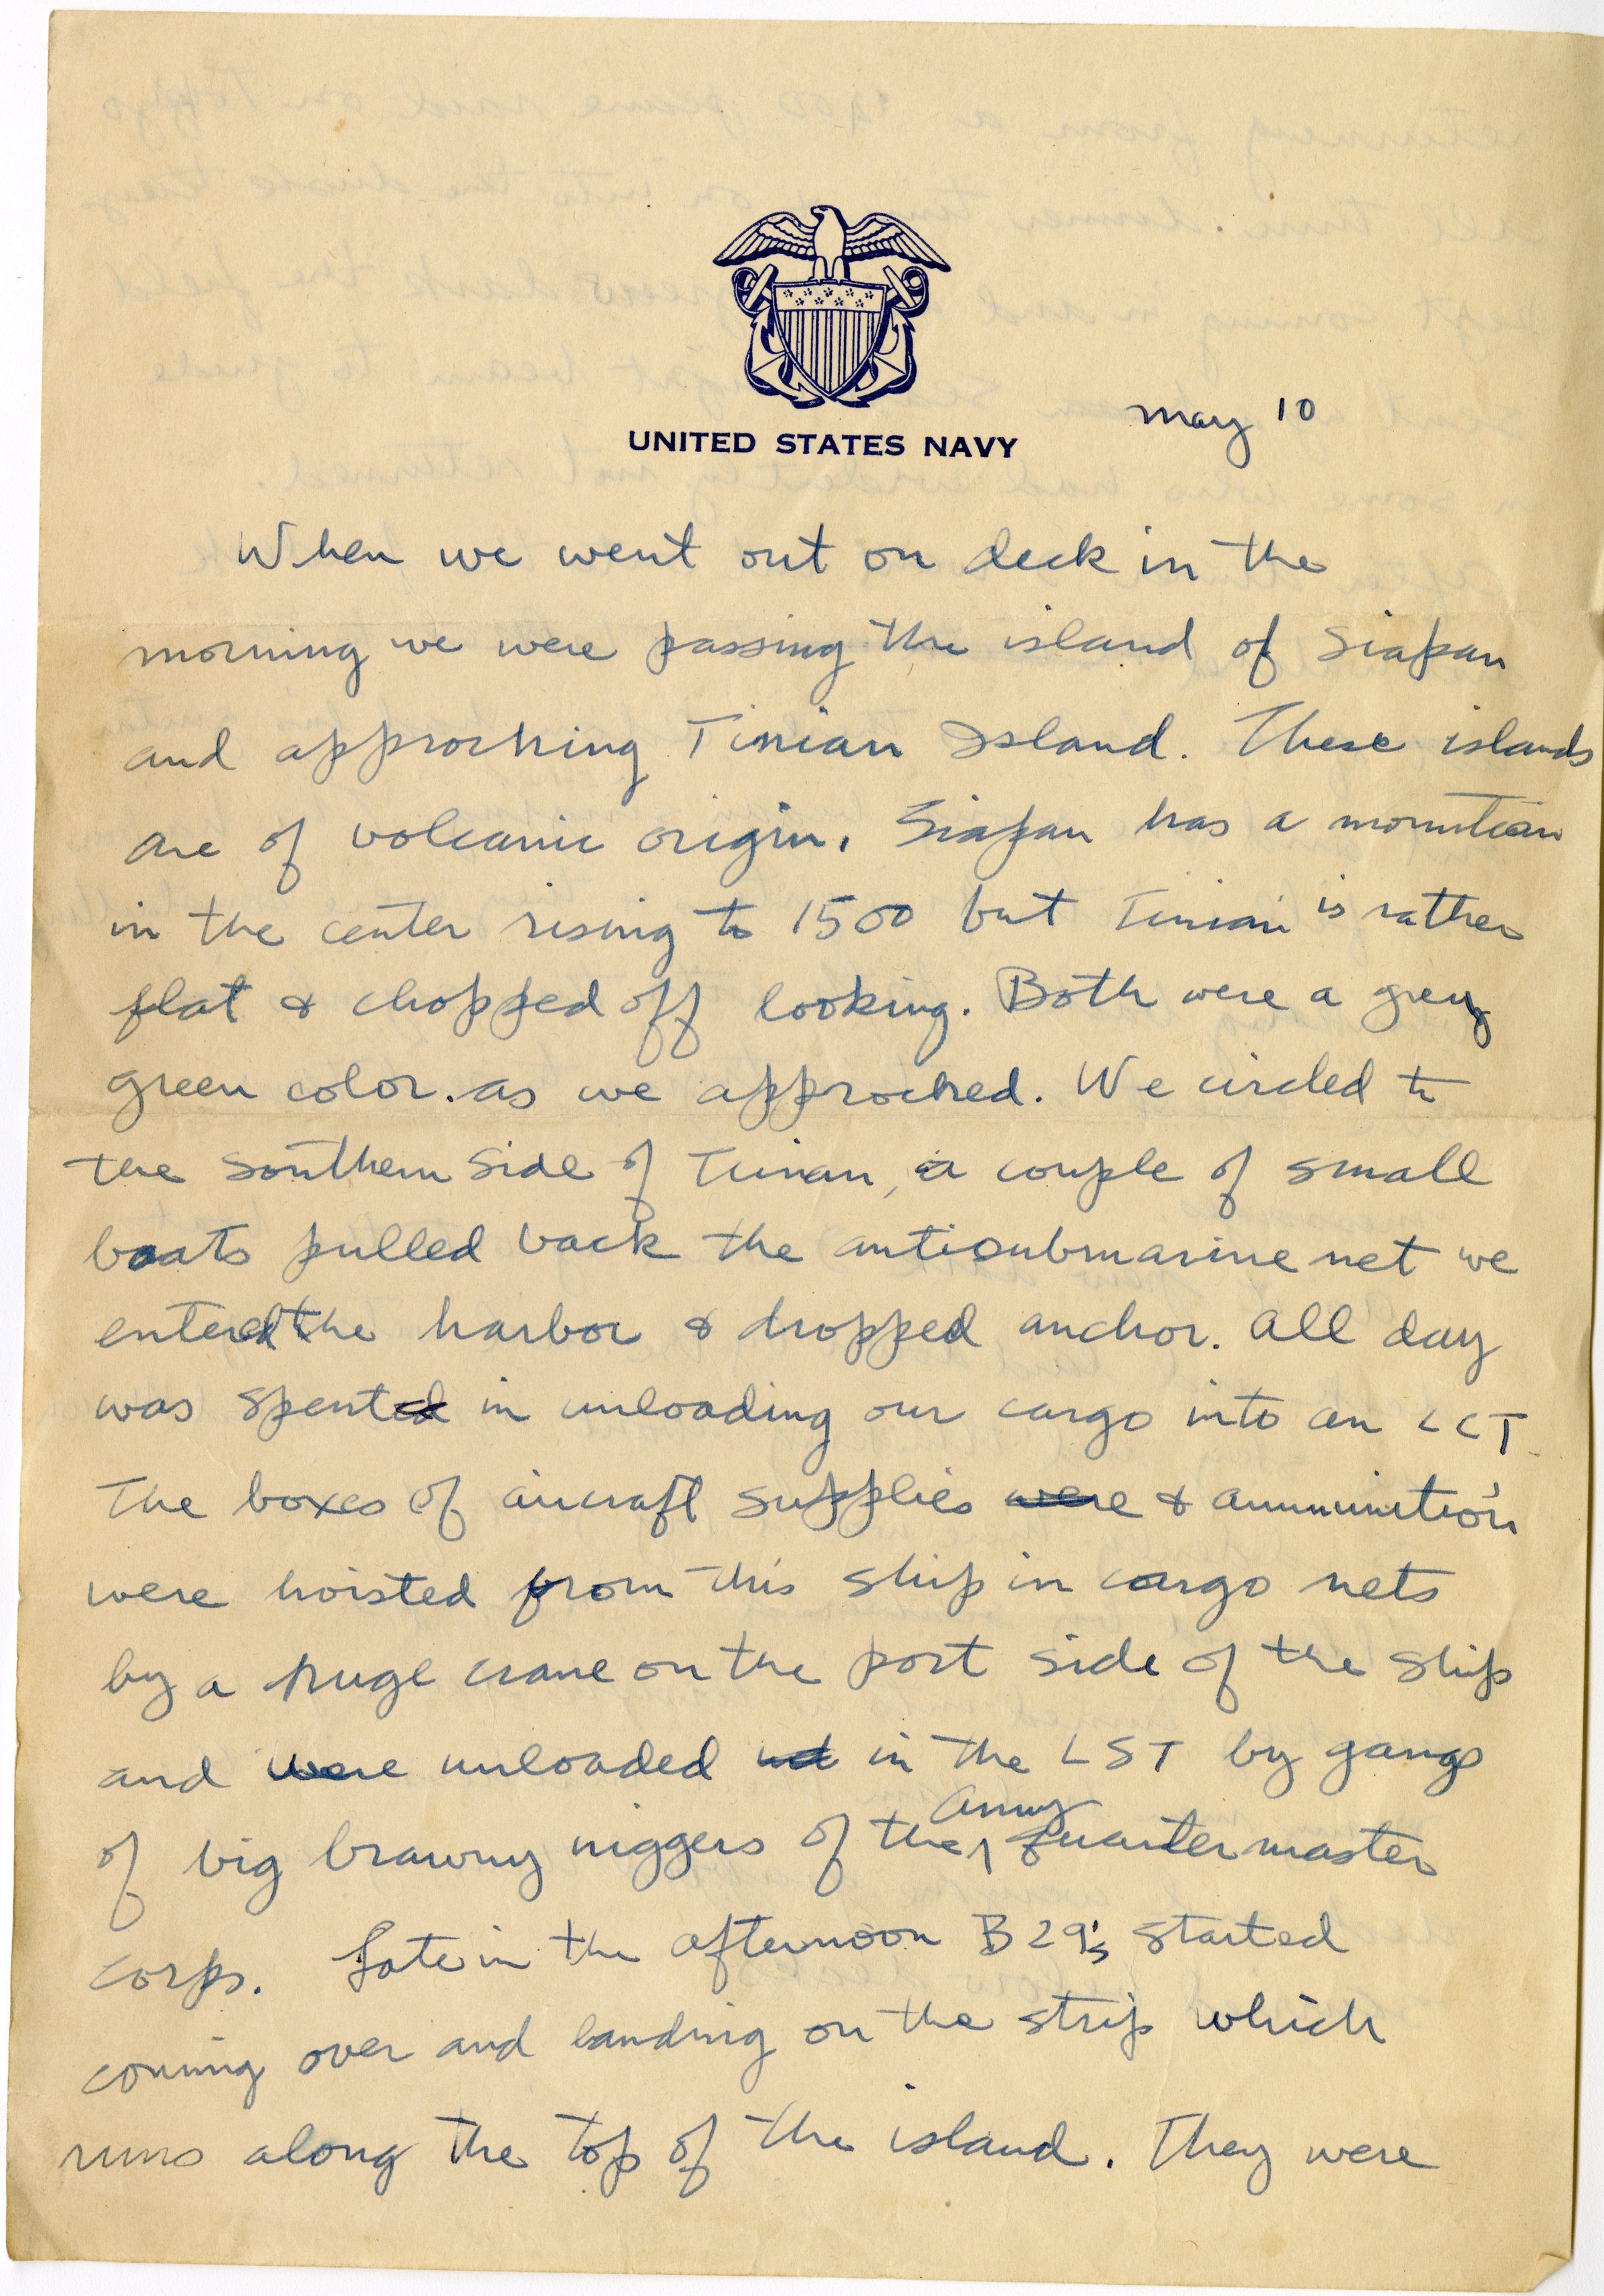 Primary Image of Gerald Hennesy Letter to his Mother Dated May 10, 1945